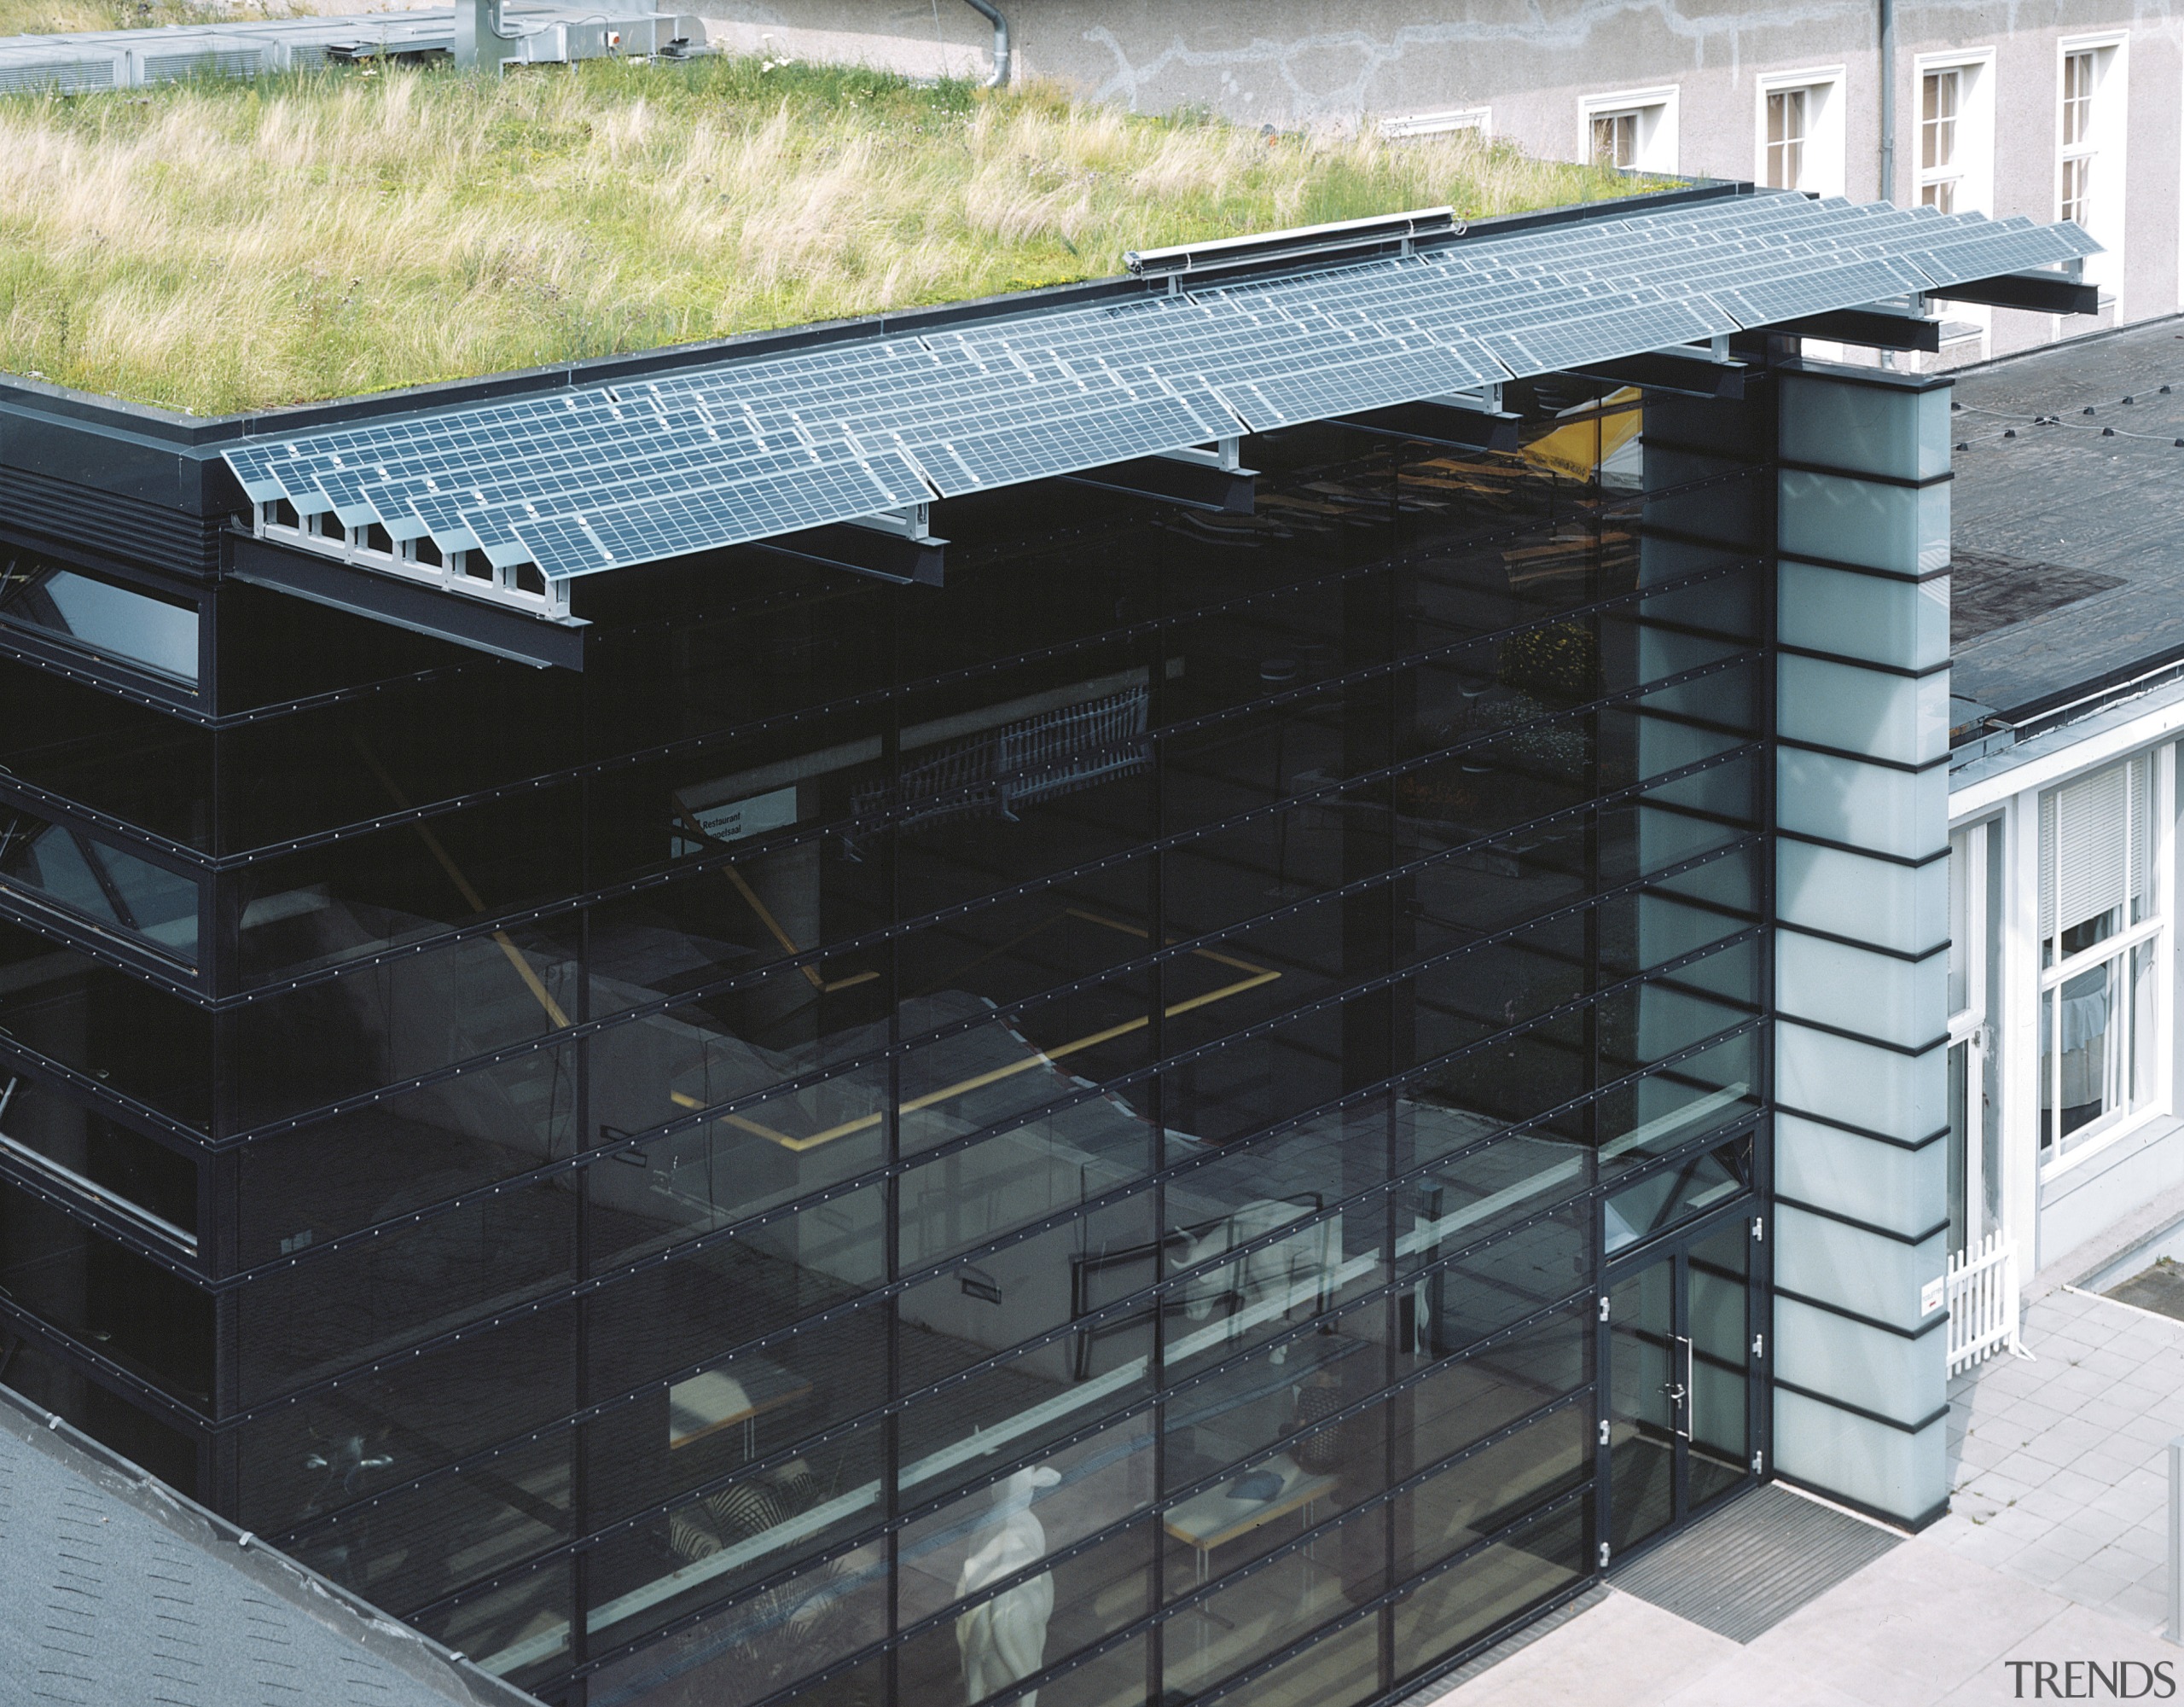 Colt Tolfab offers a range of sunshades and architecture, building, daylighting, facade, roof, structure, black